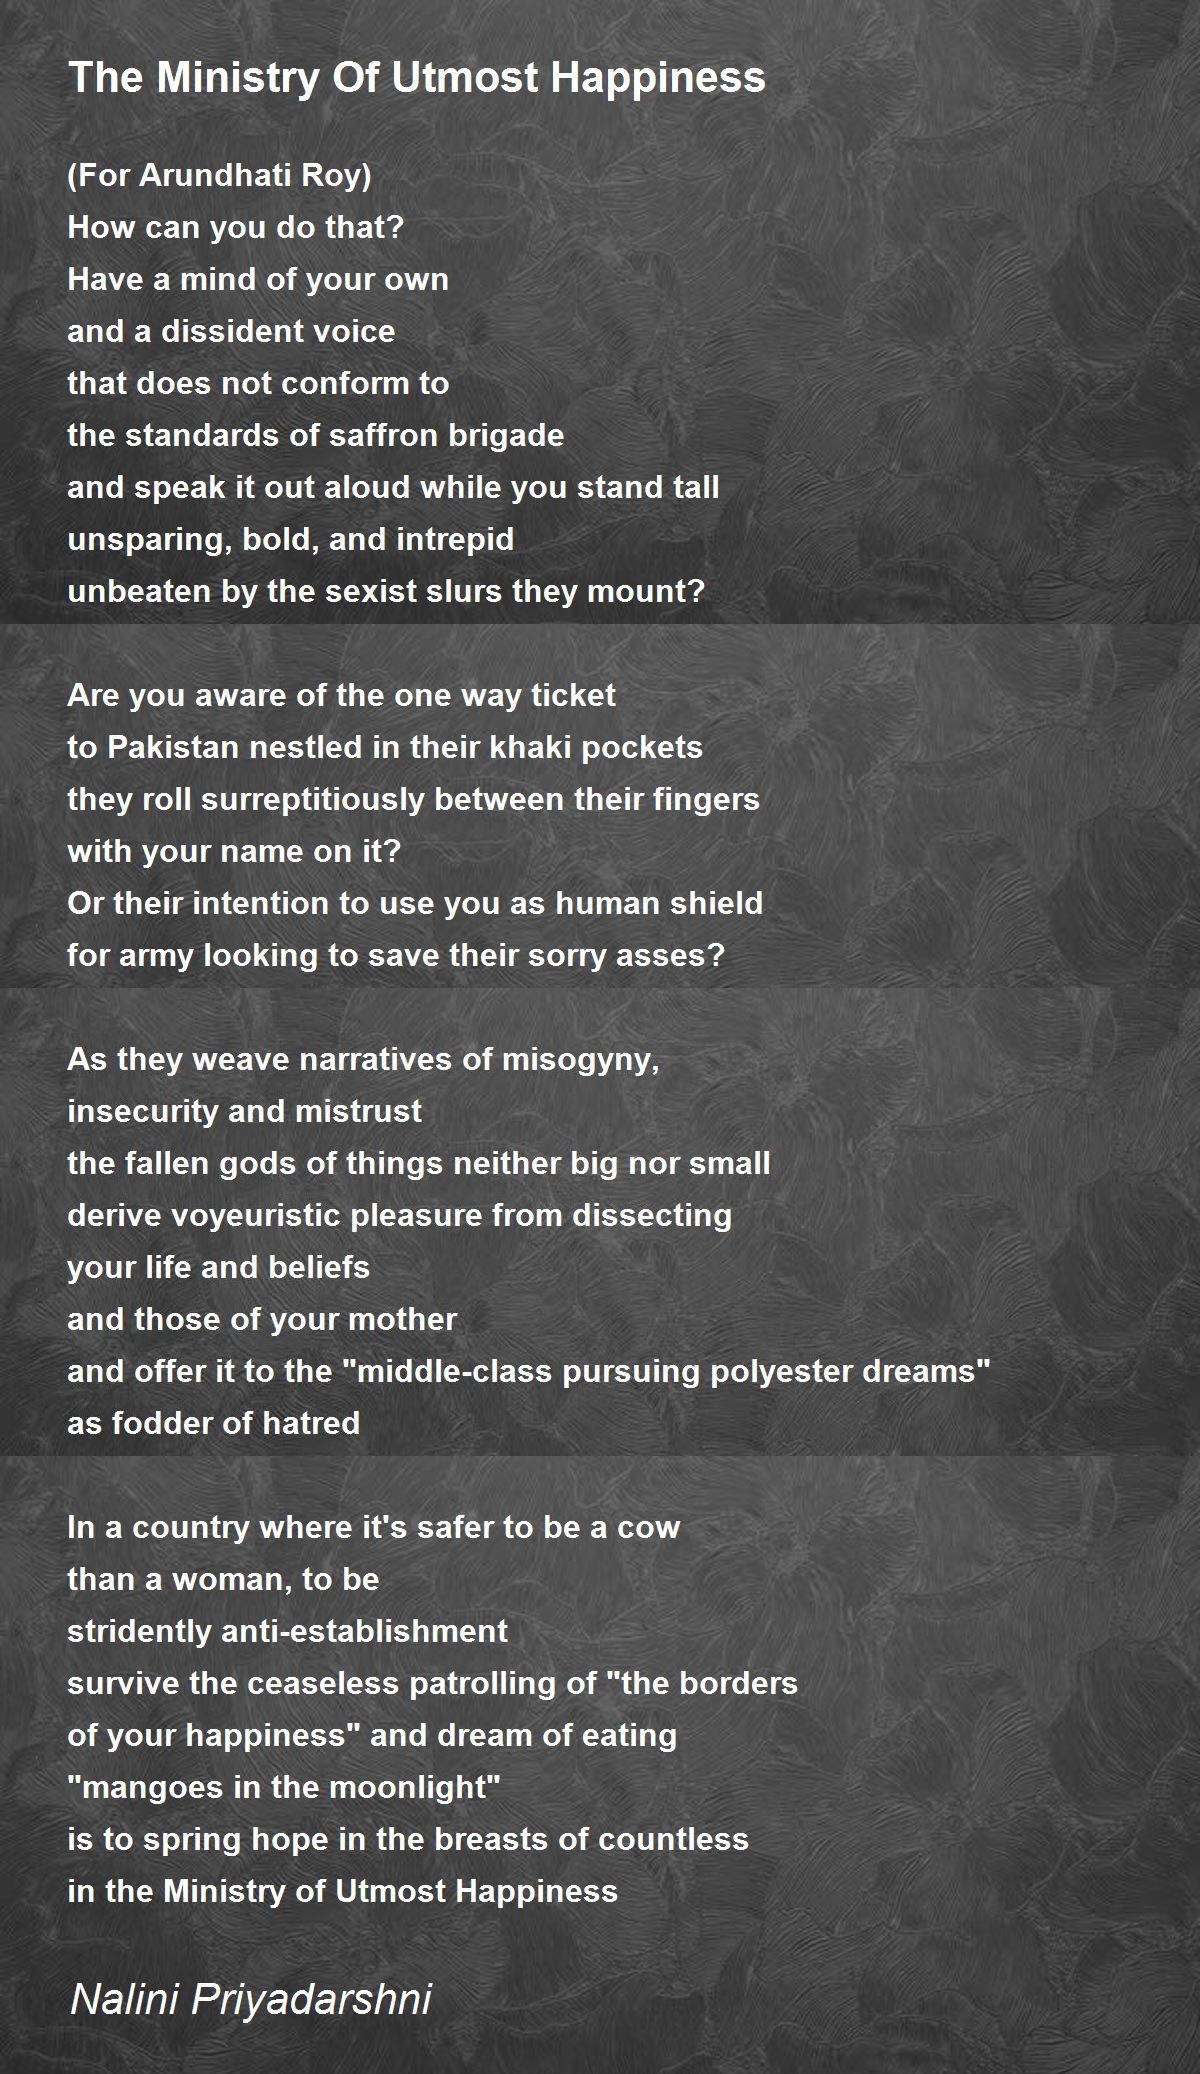 The Ministry Of Utmost Happiness - The Ministry Of Utmost Happiness Poem By Nalini Priyadarshni